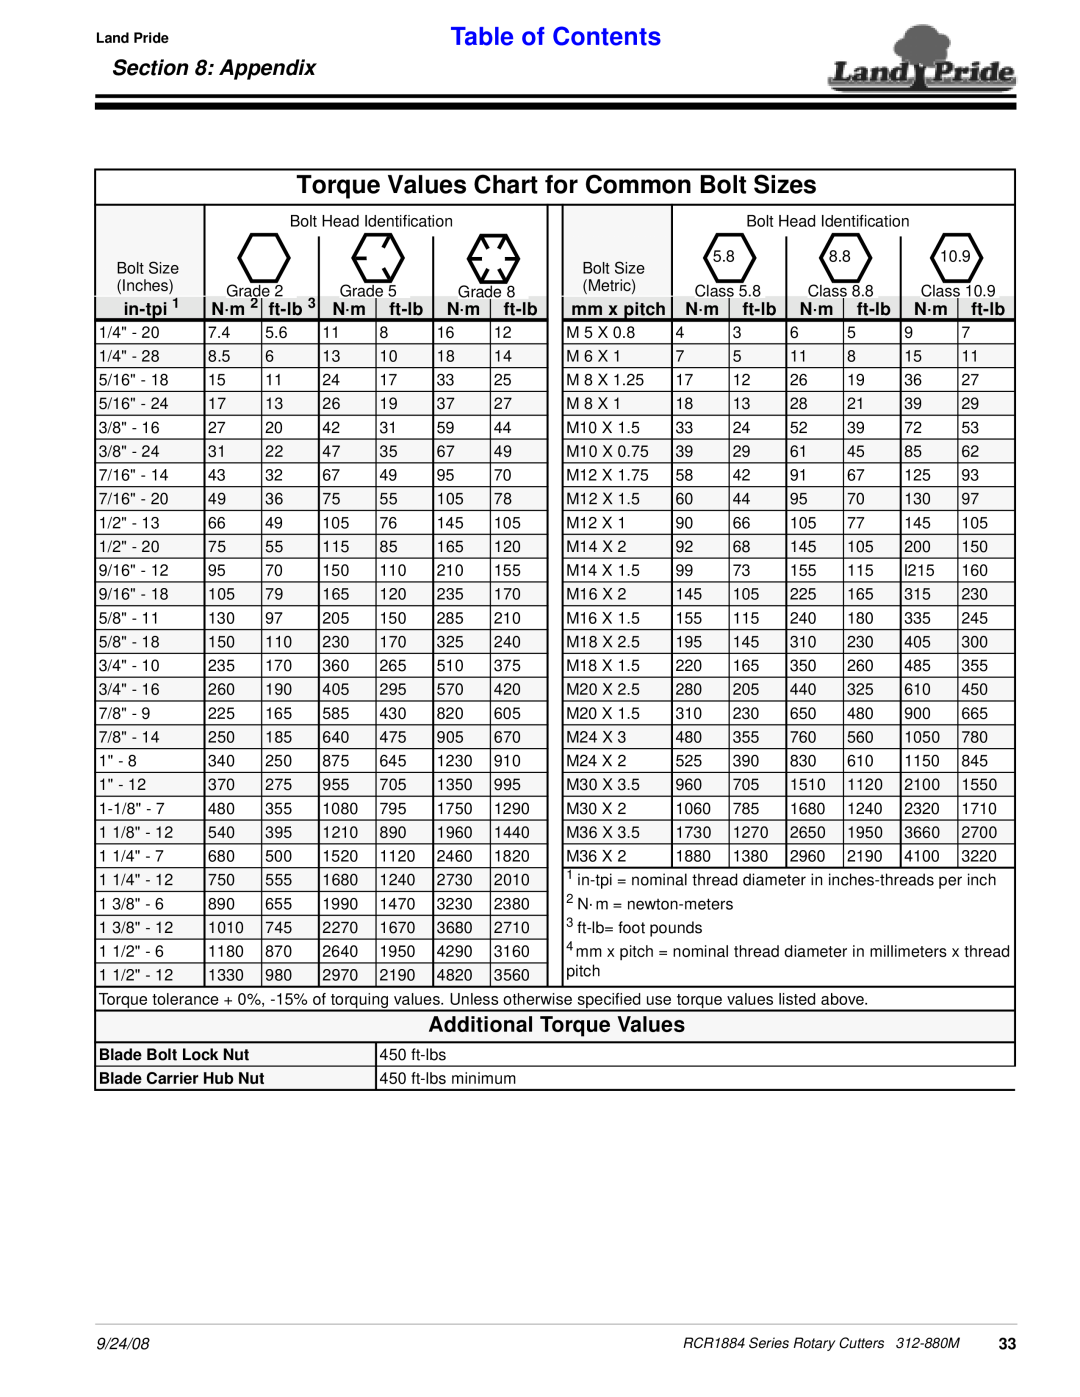 Land Pride RCR1884 manual Torque Values Chart for Common Bolt Sizes, Appendix, Table of Contents 